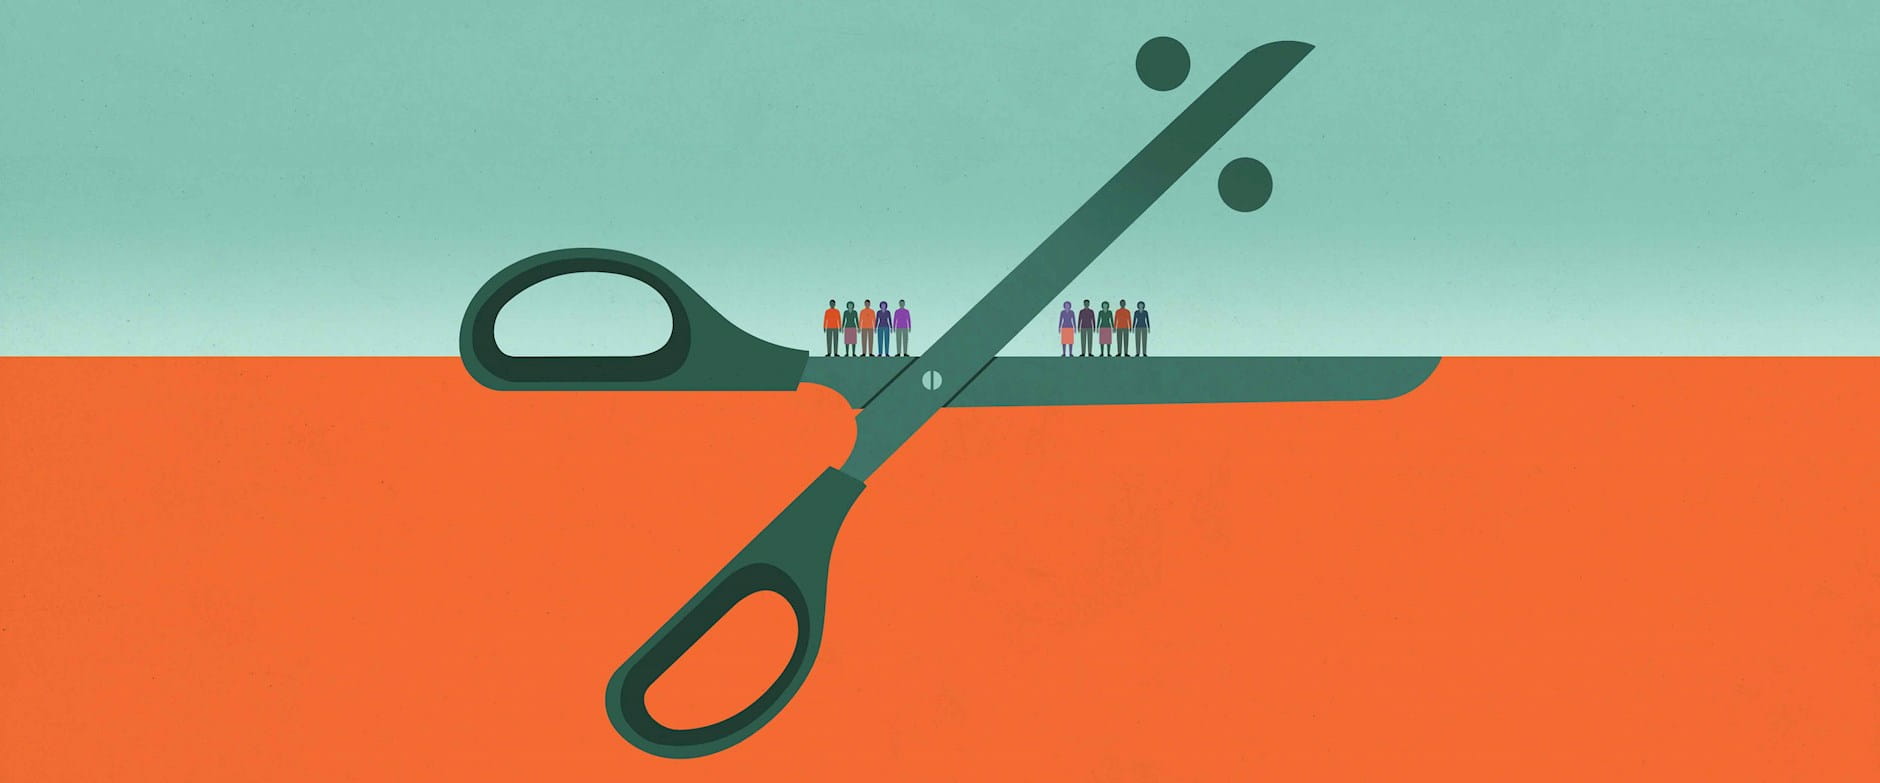 People standing on a blade of a scissors whose other blade is a percentage symbol